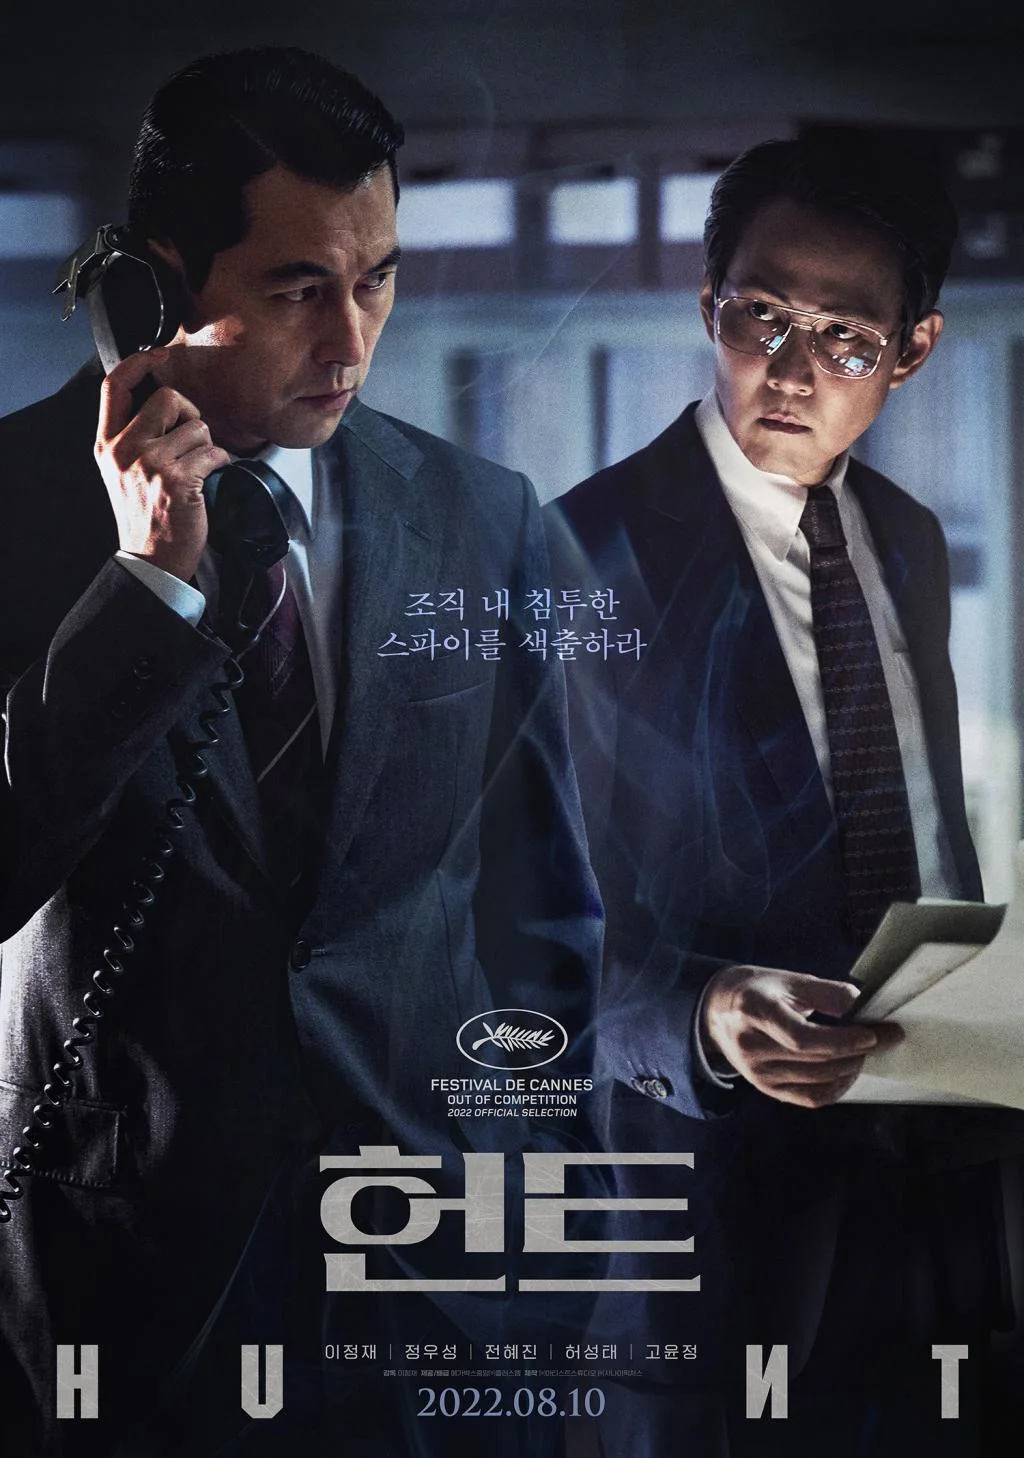 New trailer for spy film "Hunt" directed and starring Jung-jae Lee!